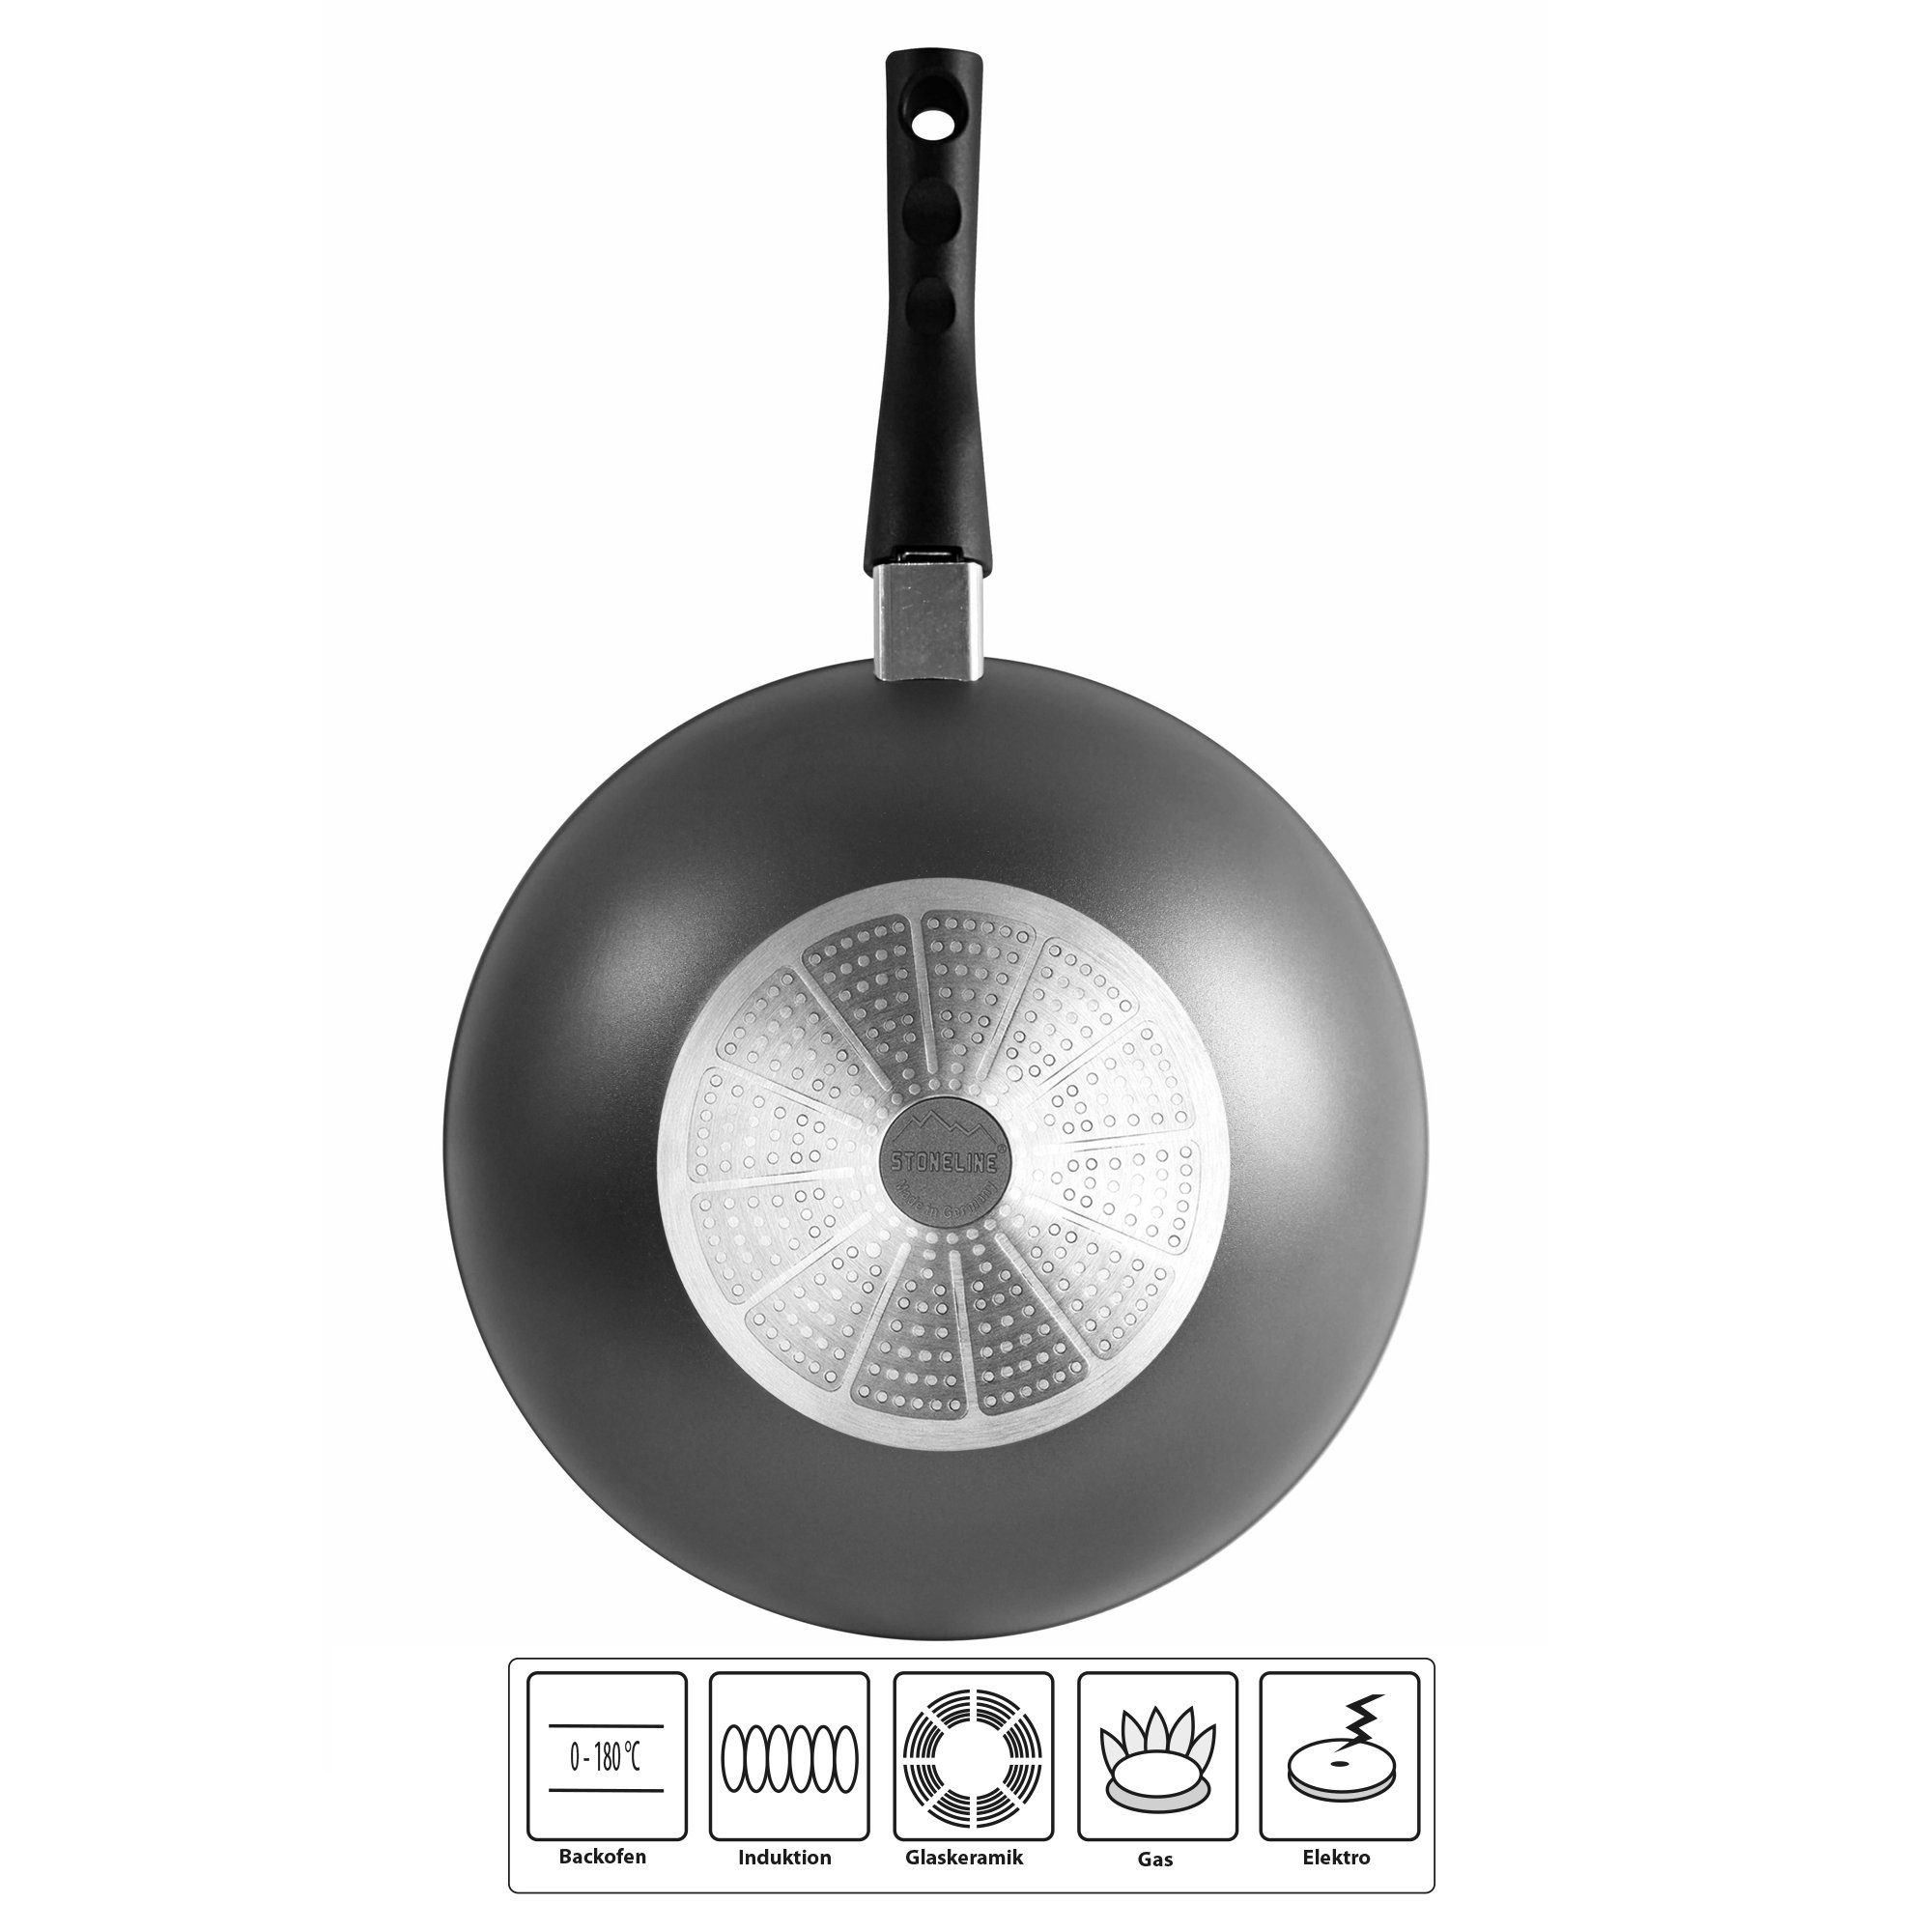 STONELINE® Wok Pan 30 cm, Removable Handle, Lid, Non-Stick | Made in Germany | FLEX